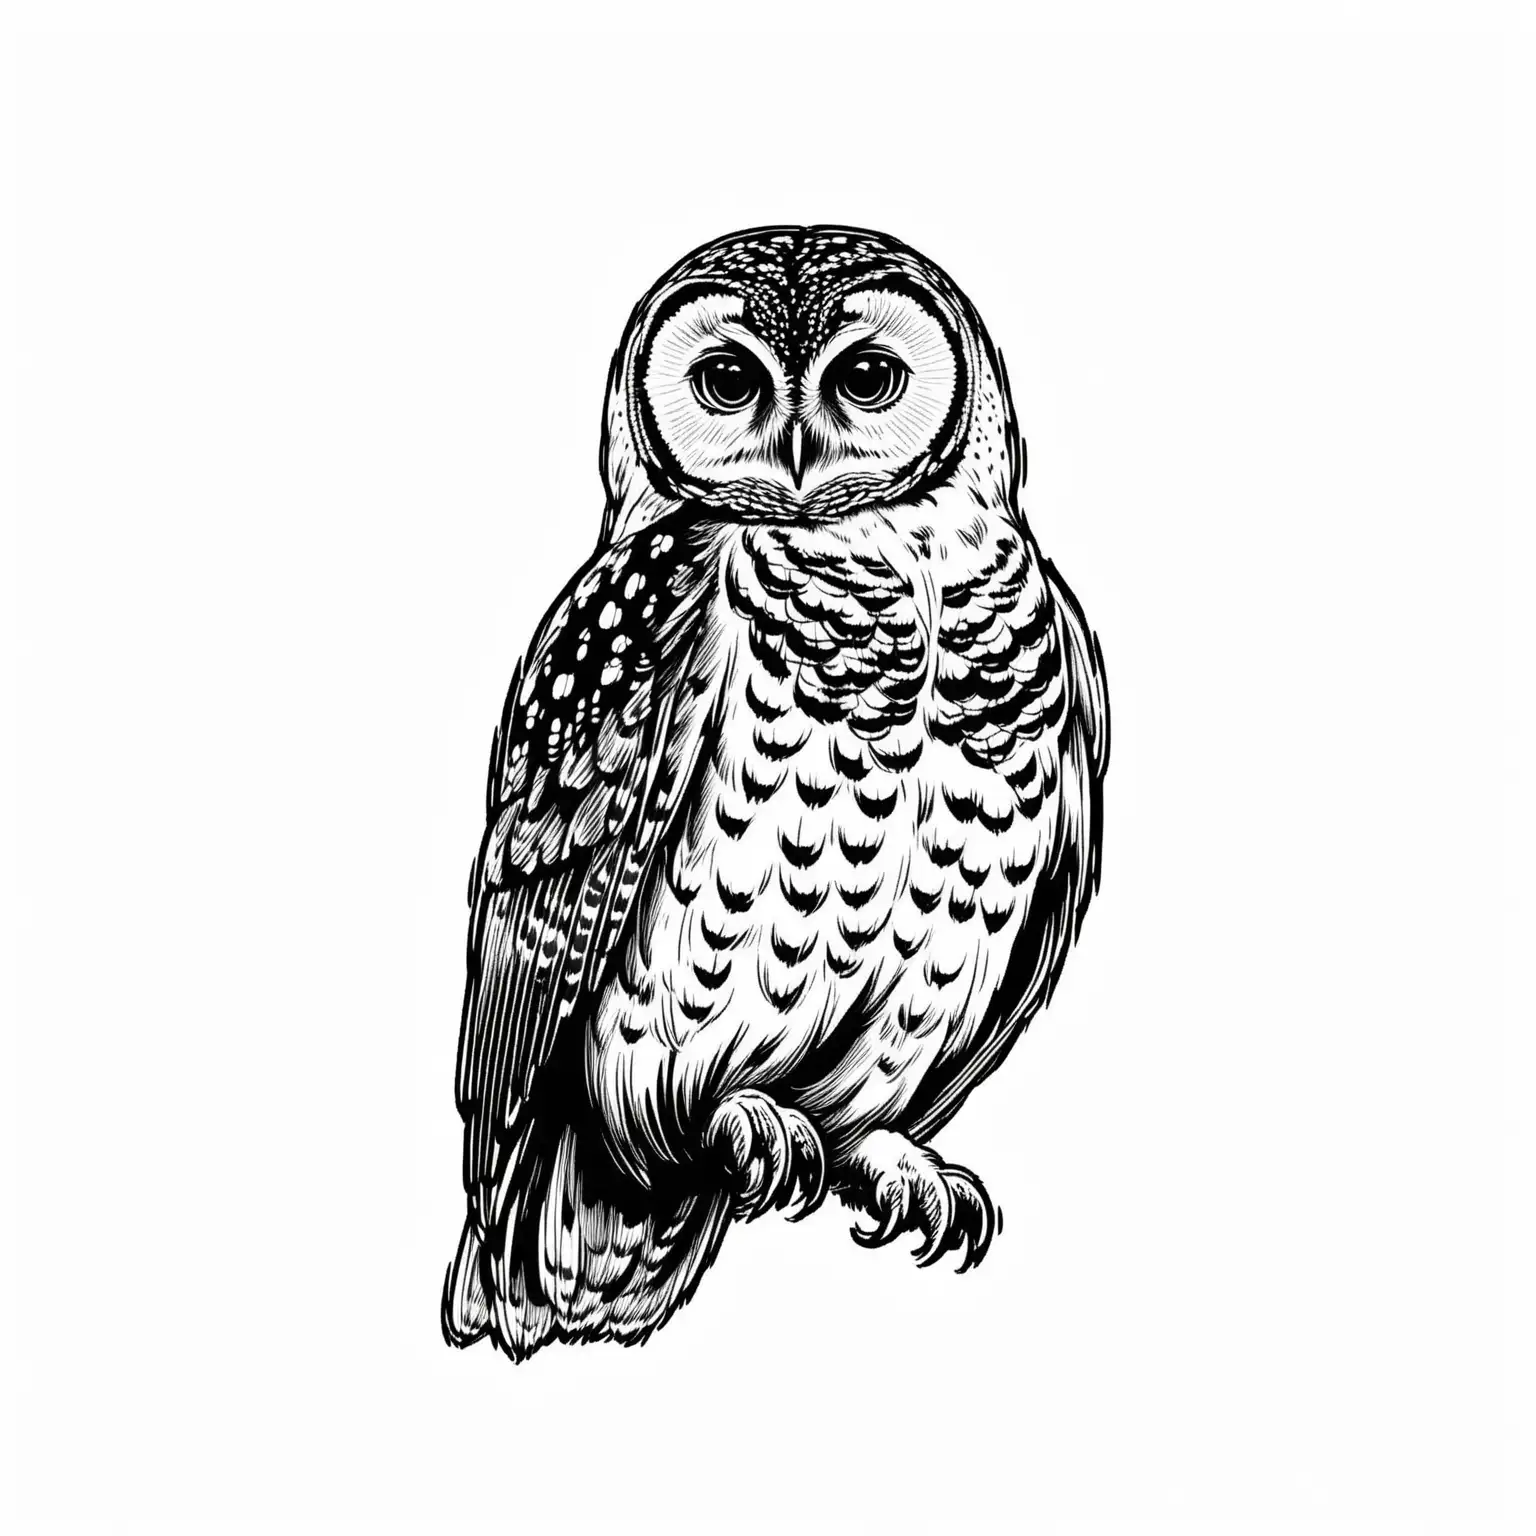 Northern Spotted Owl Outline Illustration on White Background